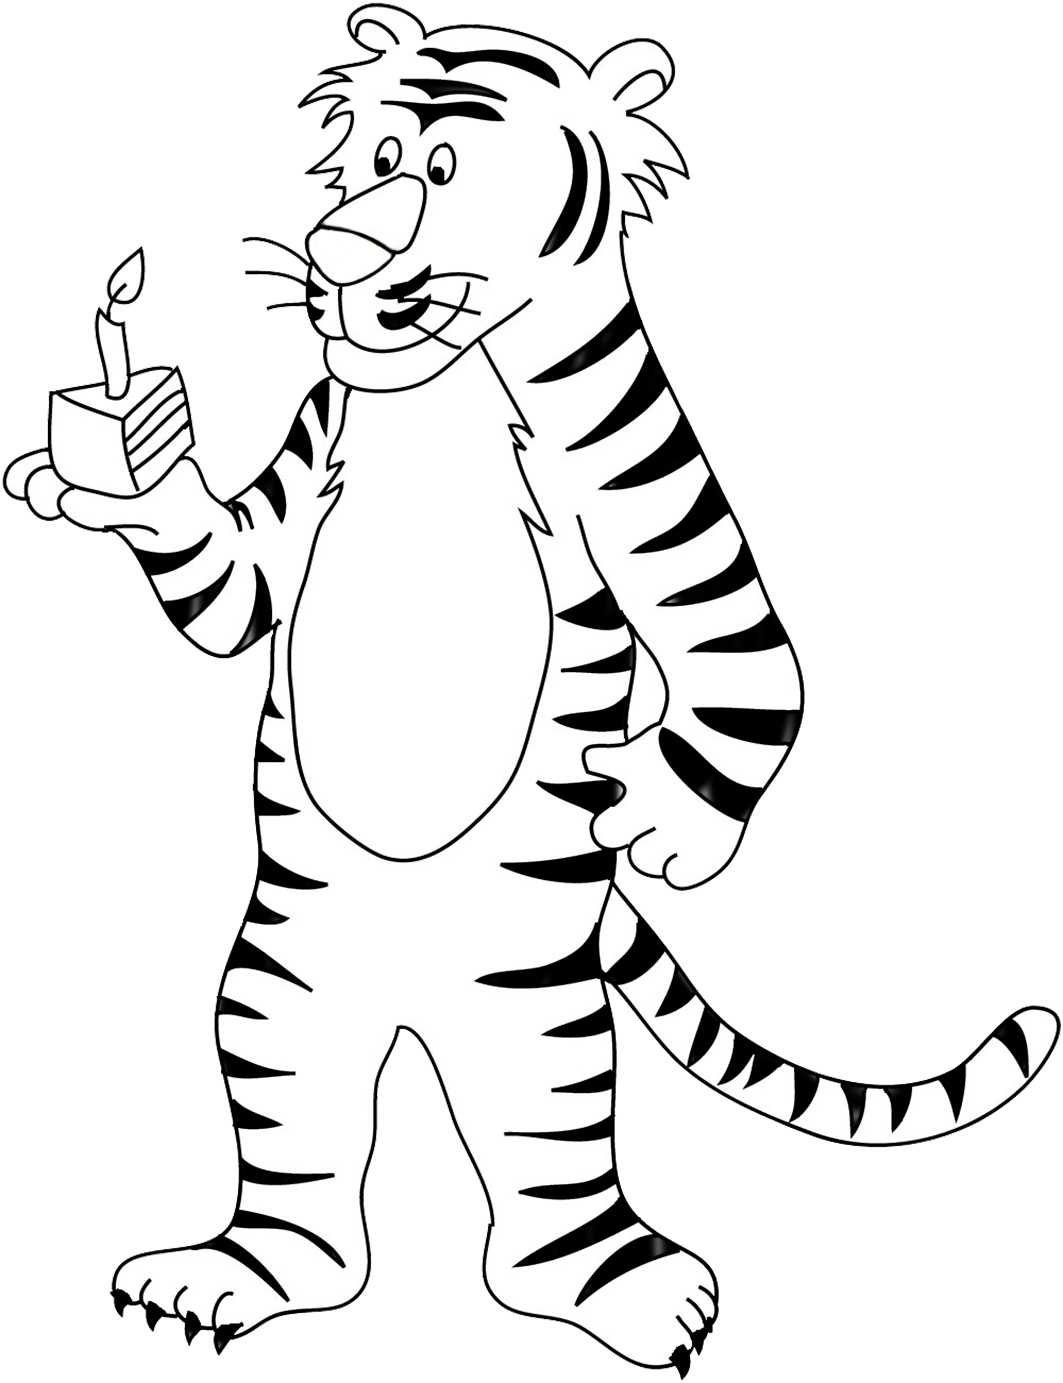 tiger coloring page with birthday cake